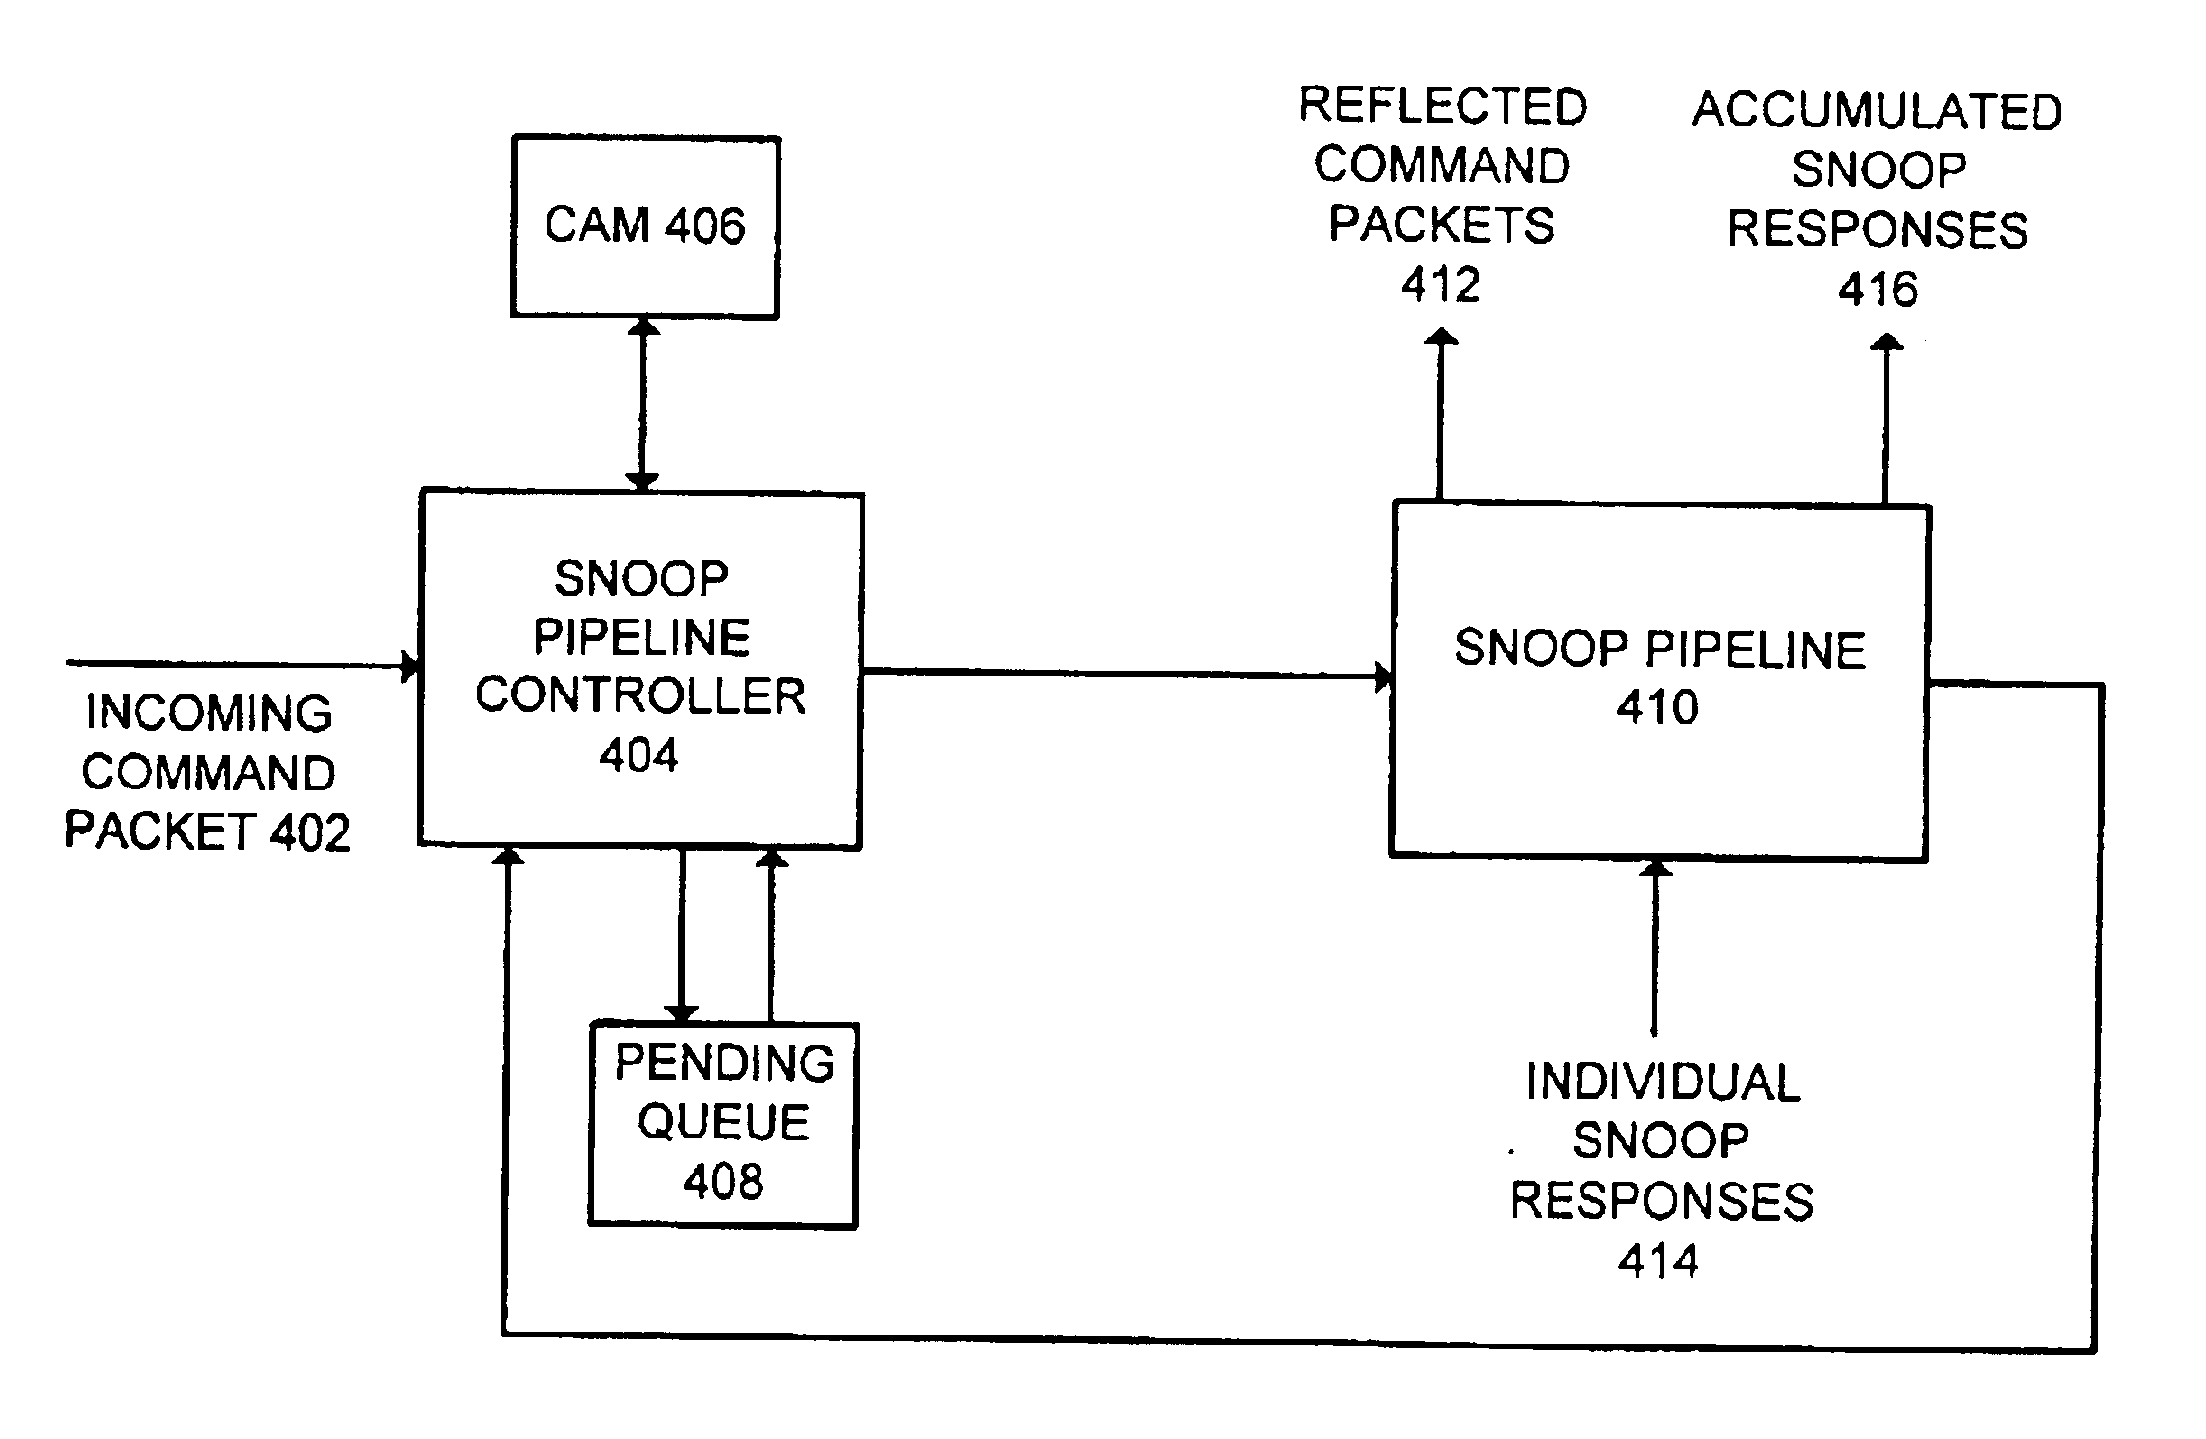 Pipelining cache-coherence operations in a shared-memory multiprocessing system